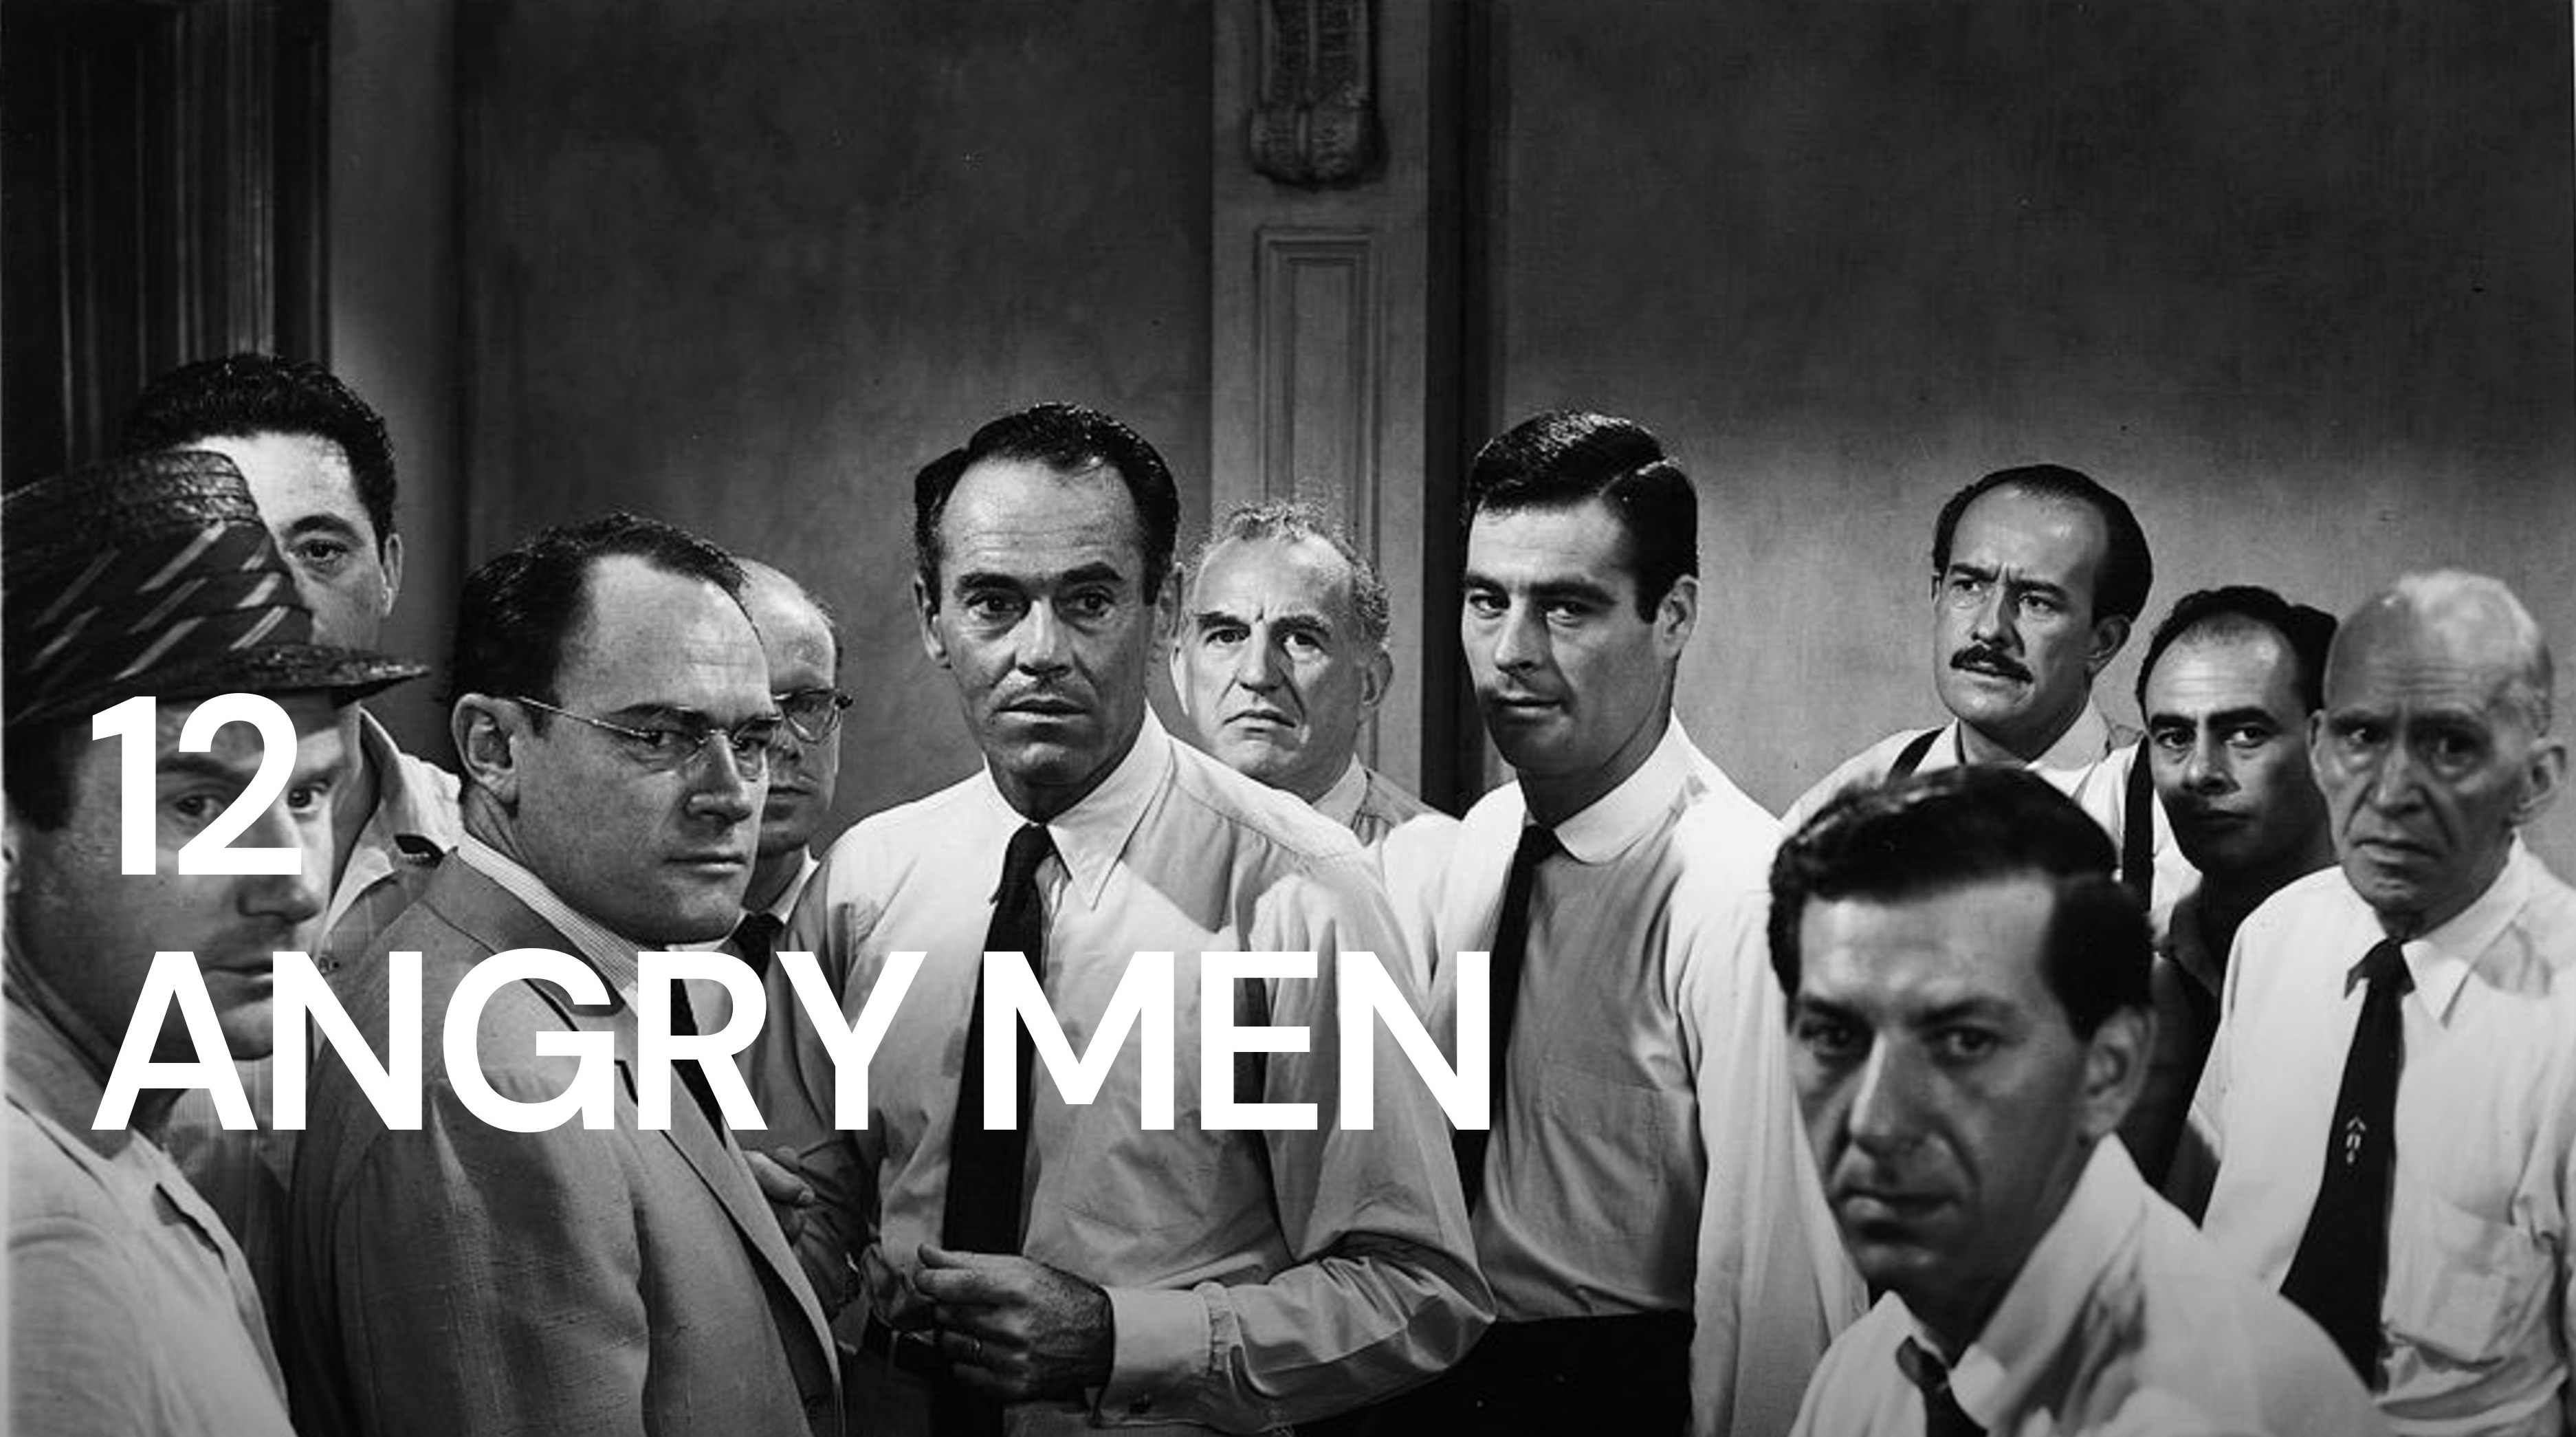 35-facts-about-the-movie-12-angry-men